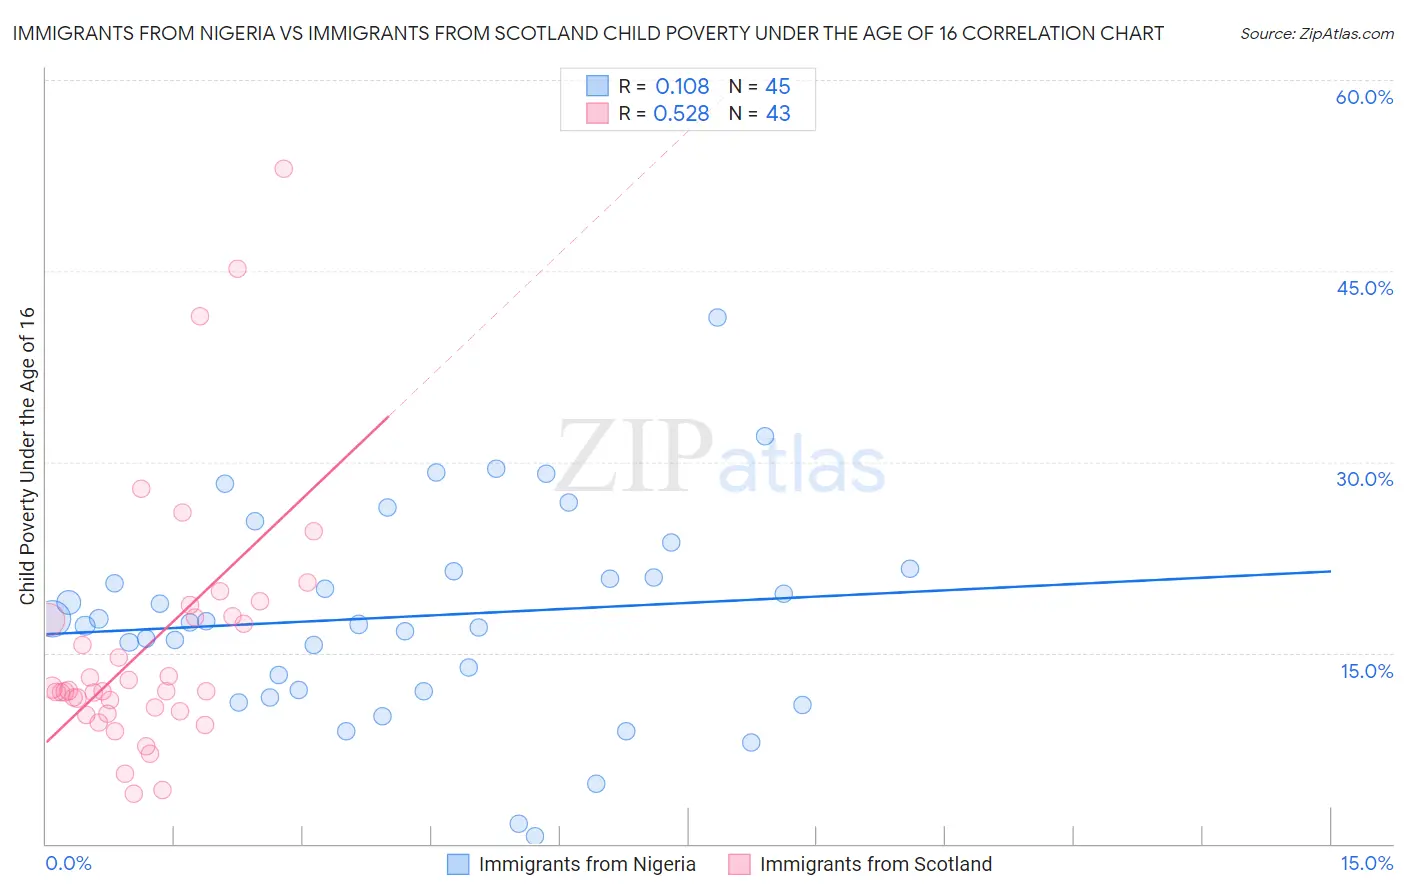 Immigrants from Nigeria vs Immigrants from Scotland Child Poverty Under the Age of 16